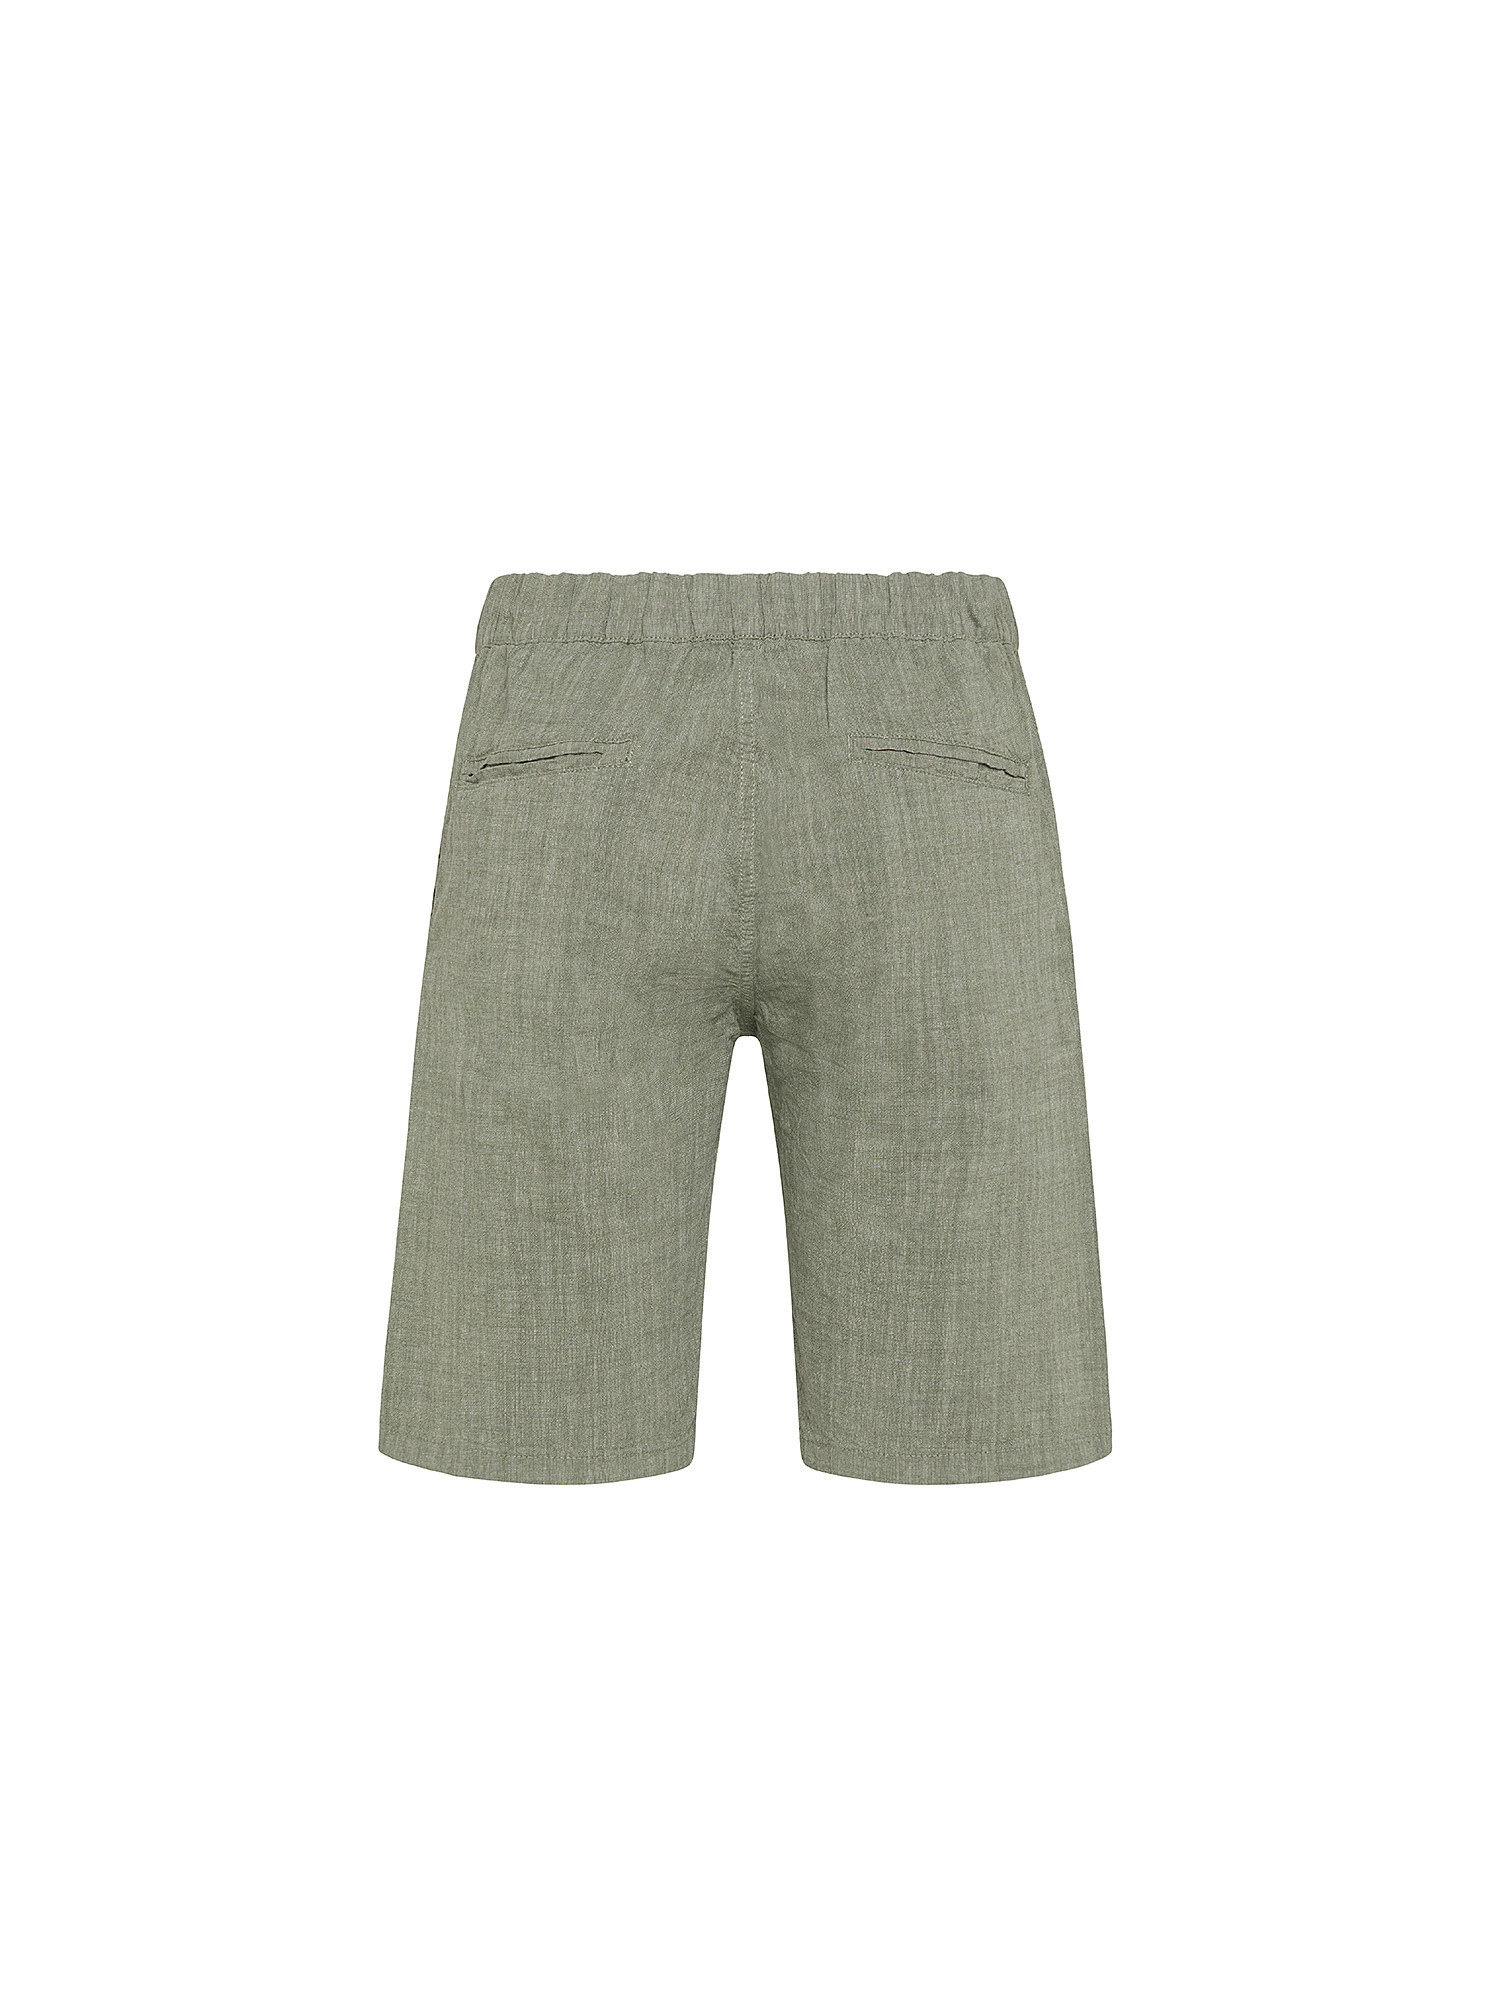 JCT - Chino bermuda in pure cotton with laces, Green, large image number 1